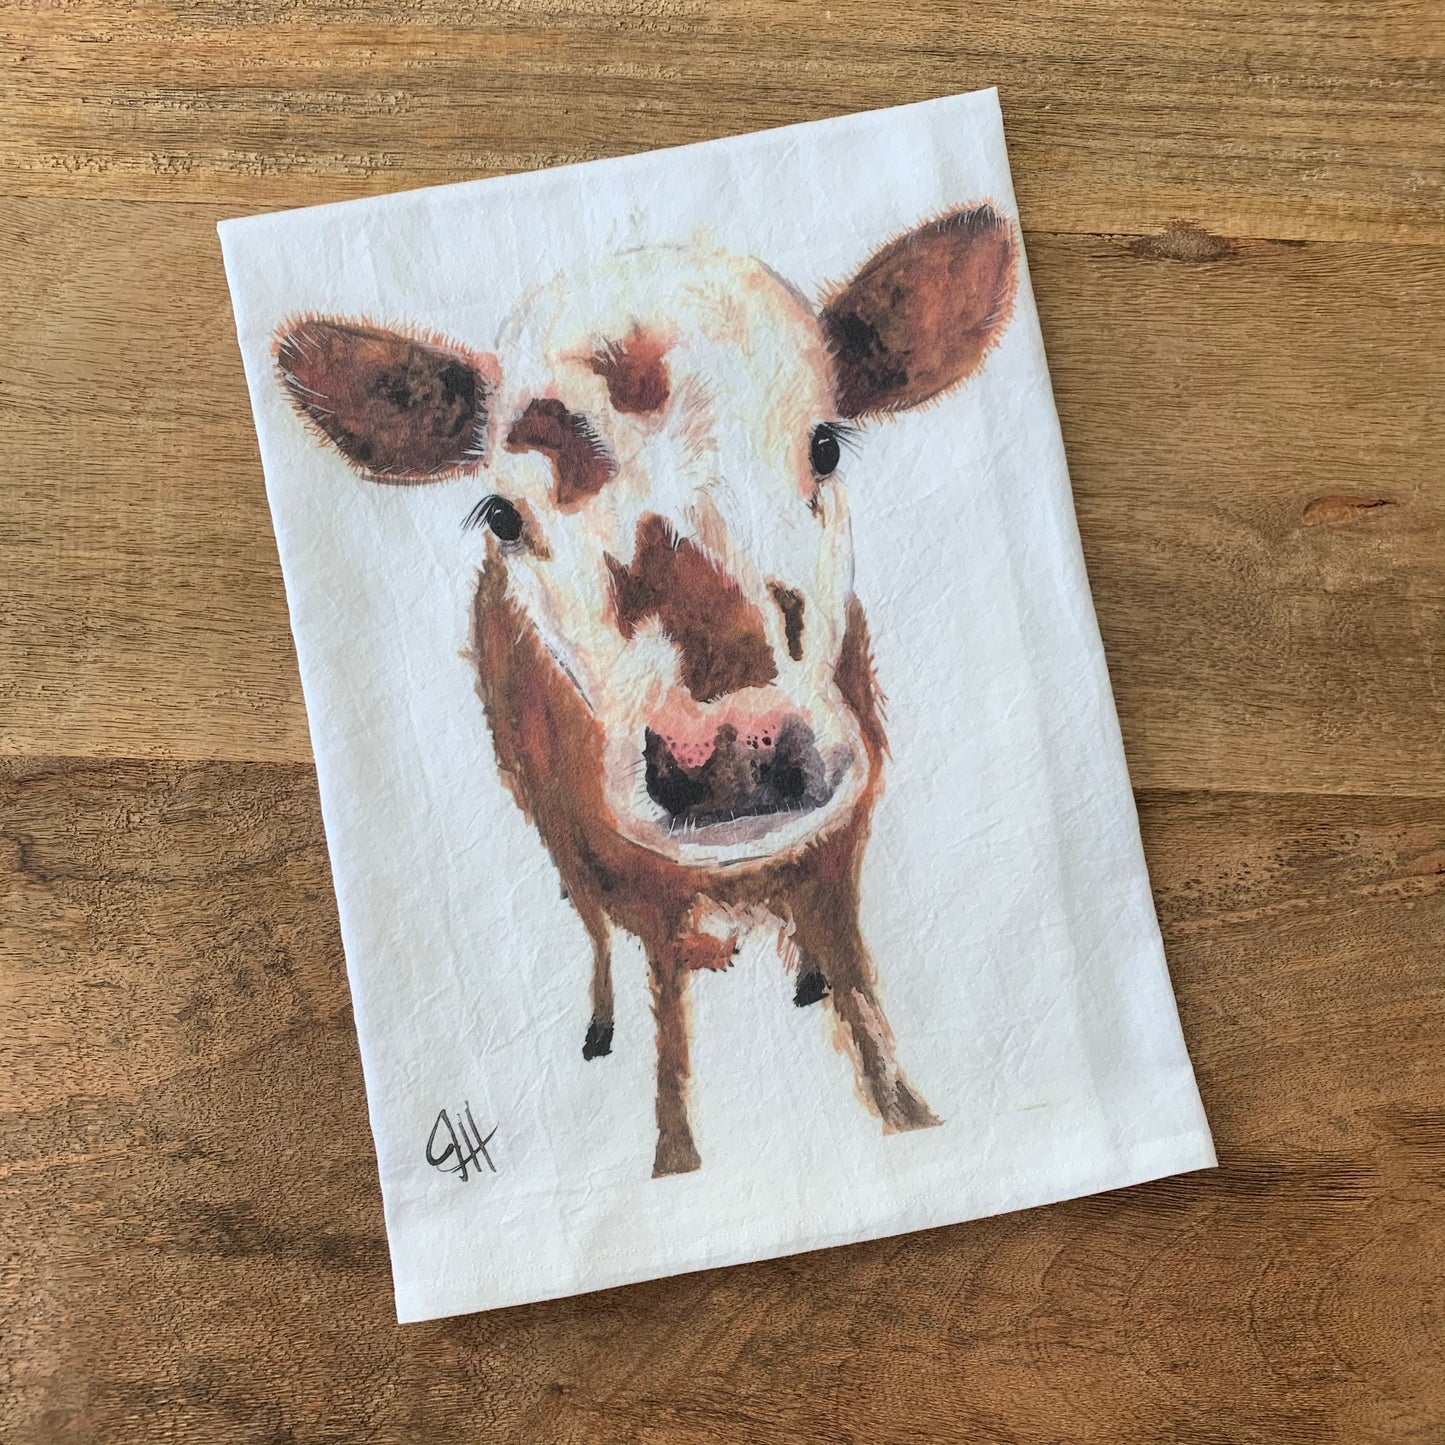 white flour sack towel with a painting of a spotted calf on a wood background